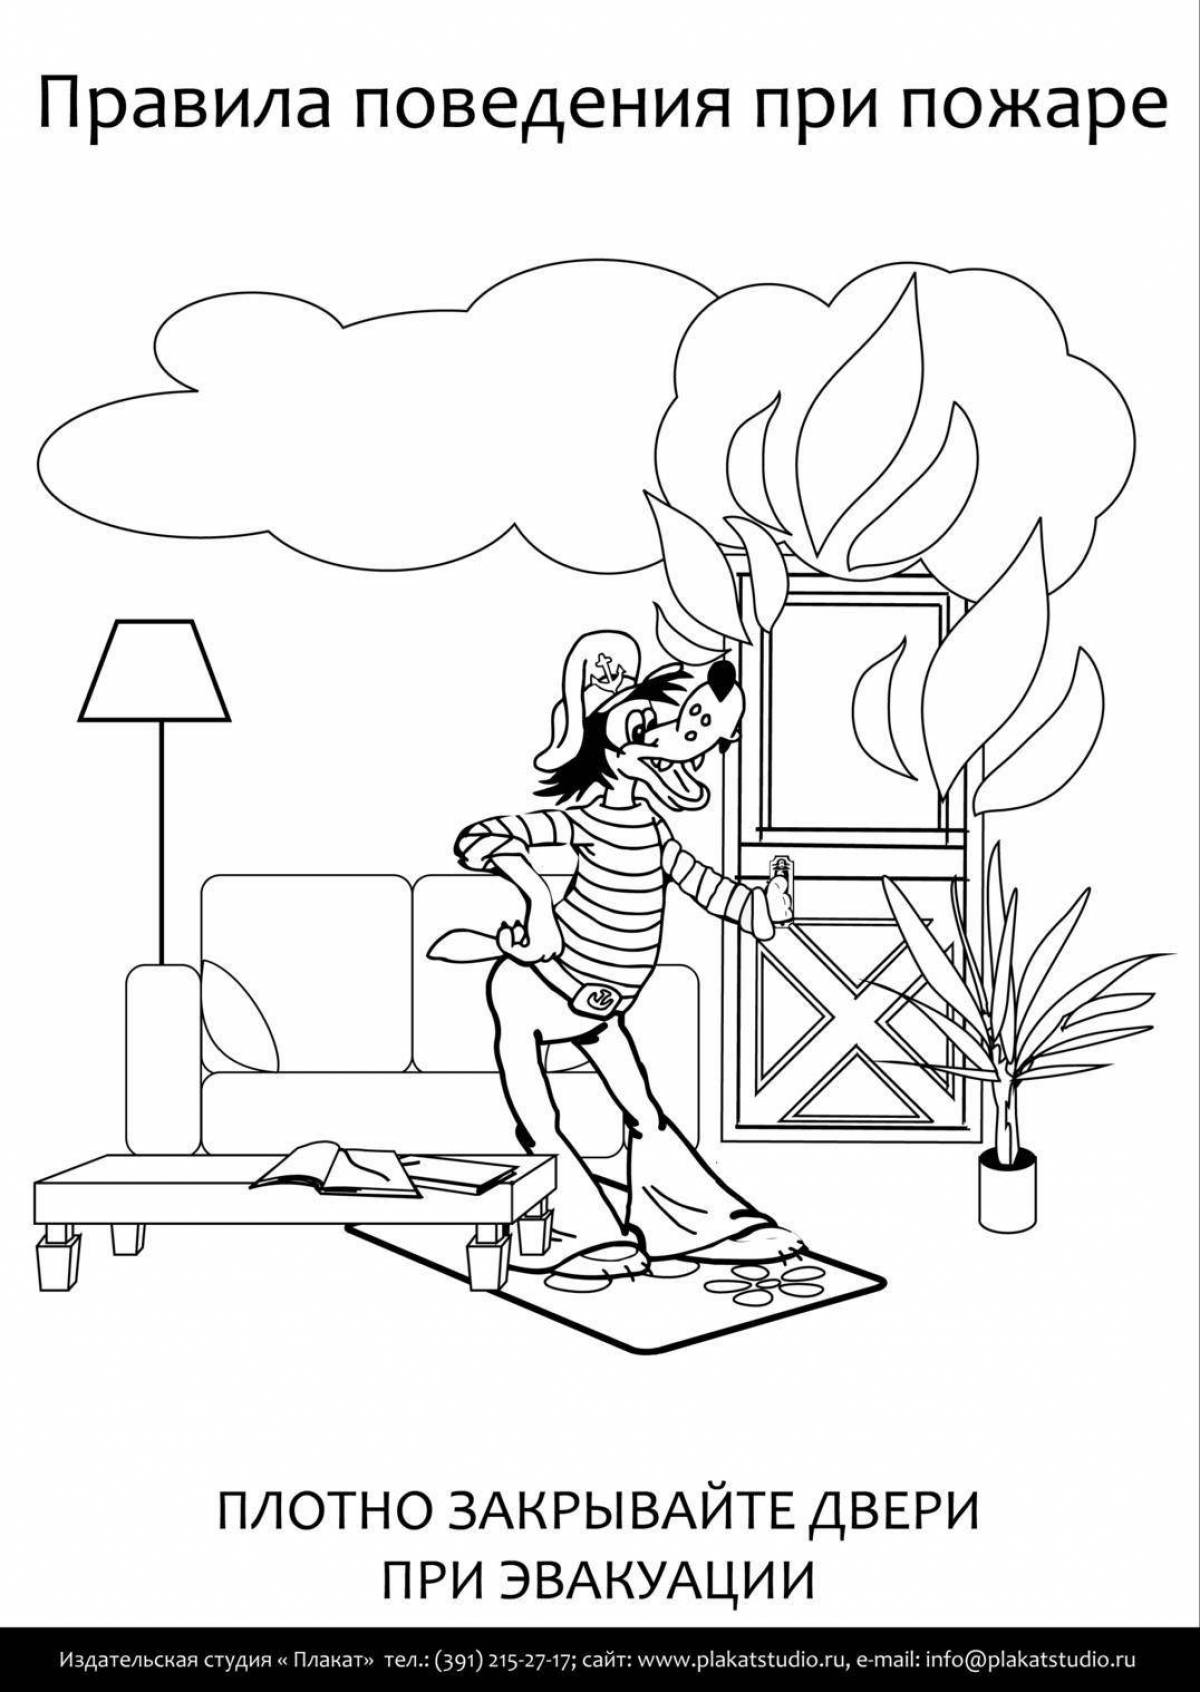 Playful safety rules coloring page